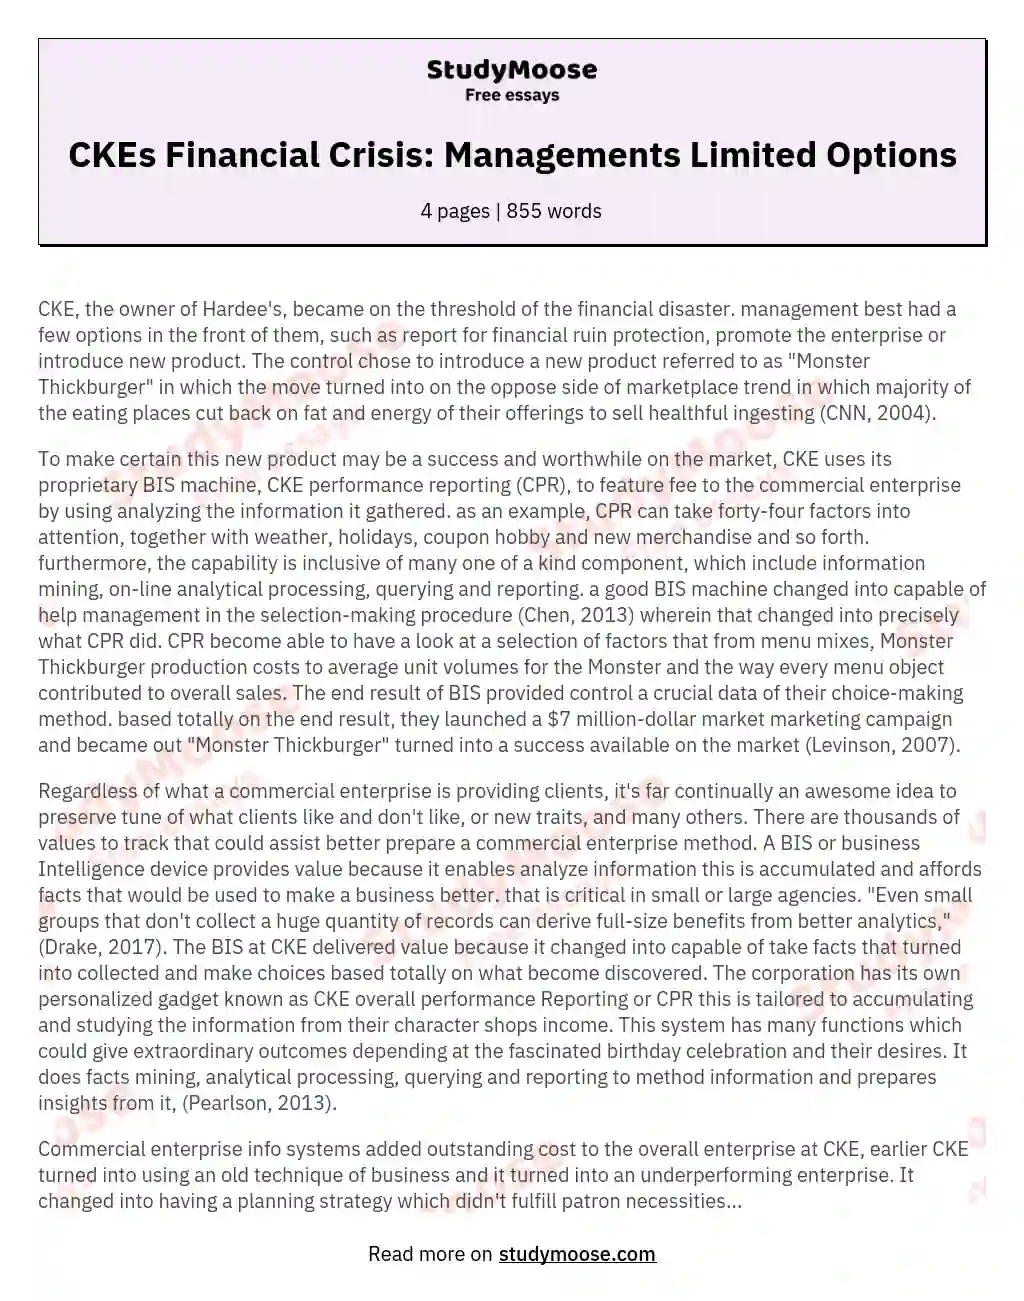 CKEs Financial Crisis: Managements Limited Options essay